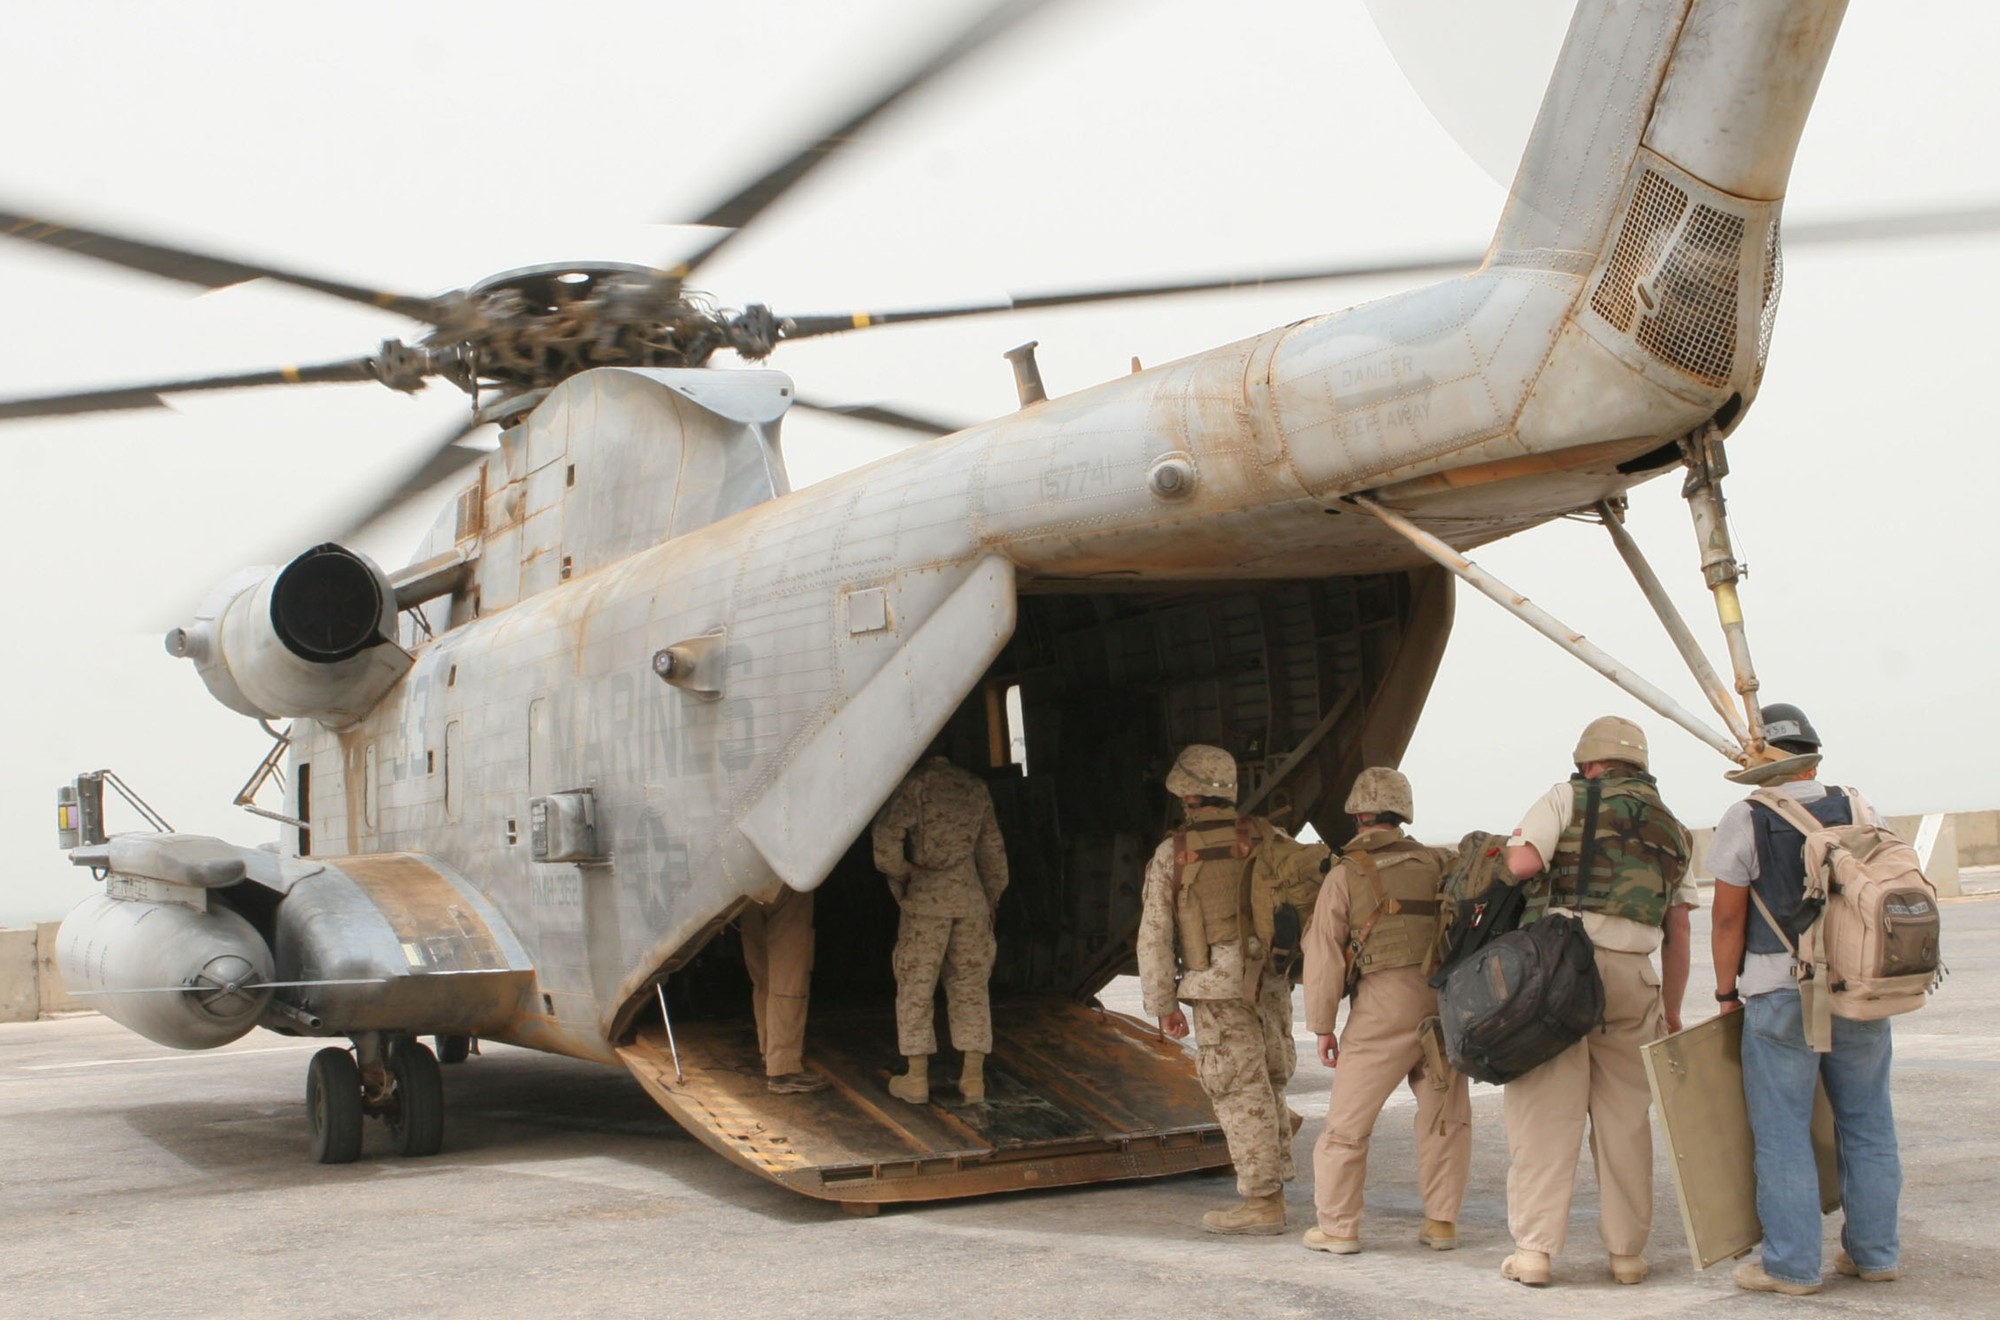 hmh-362 ugly angels marine heavy helicopter squadron usmc sikorsky ch-53d sea stallion 27 haditha iraq